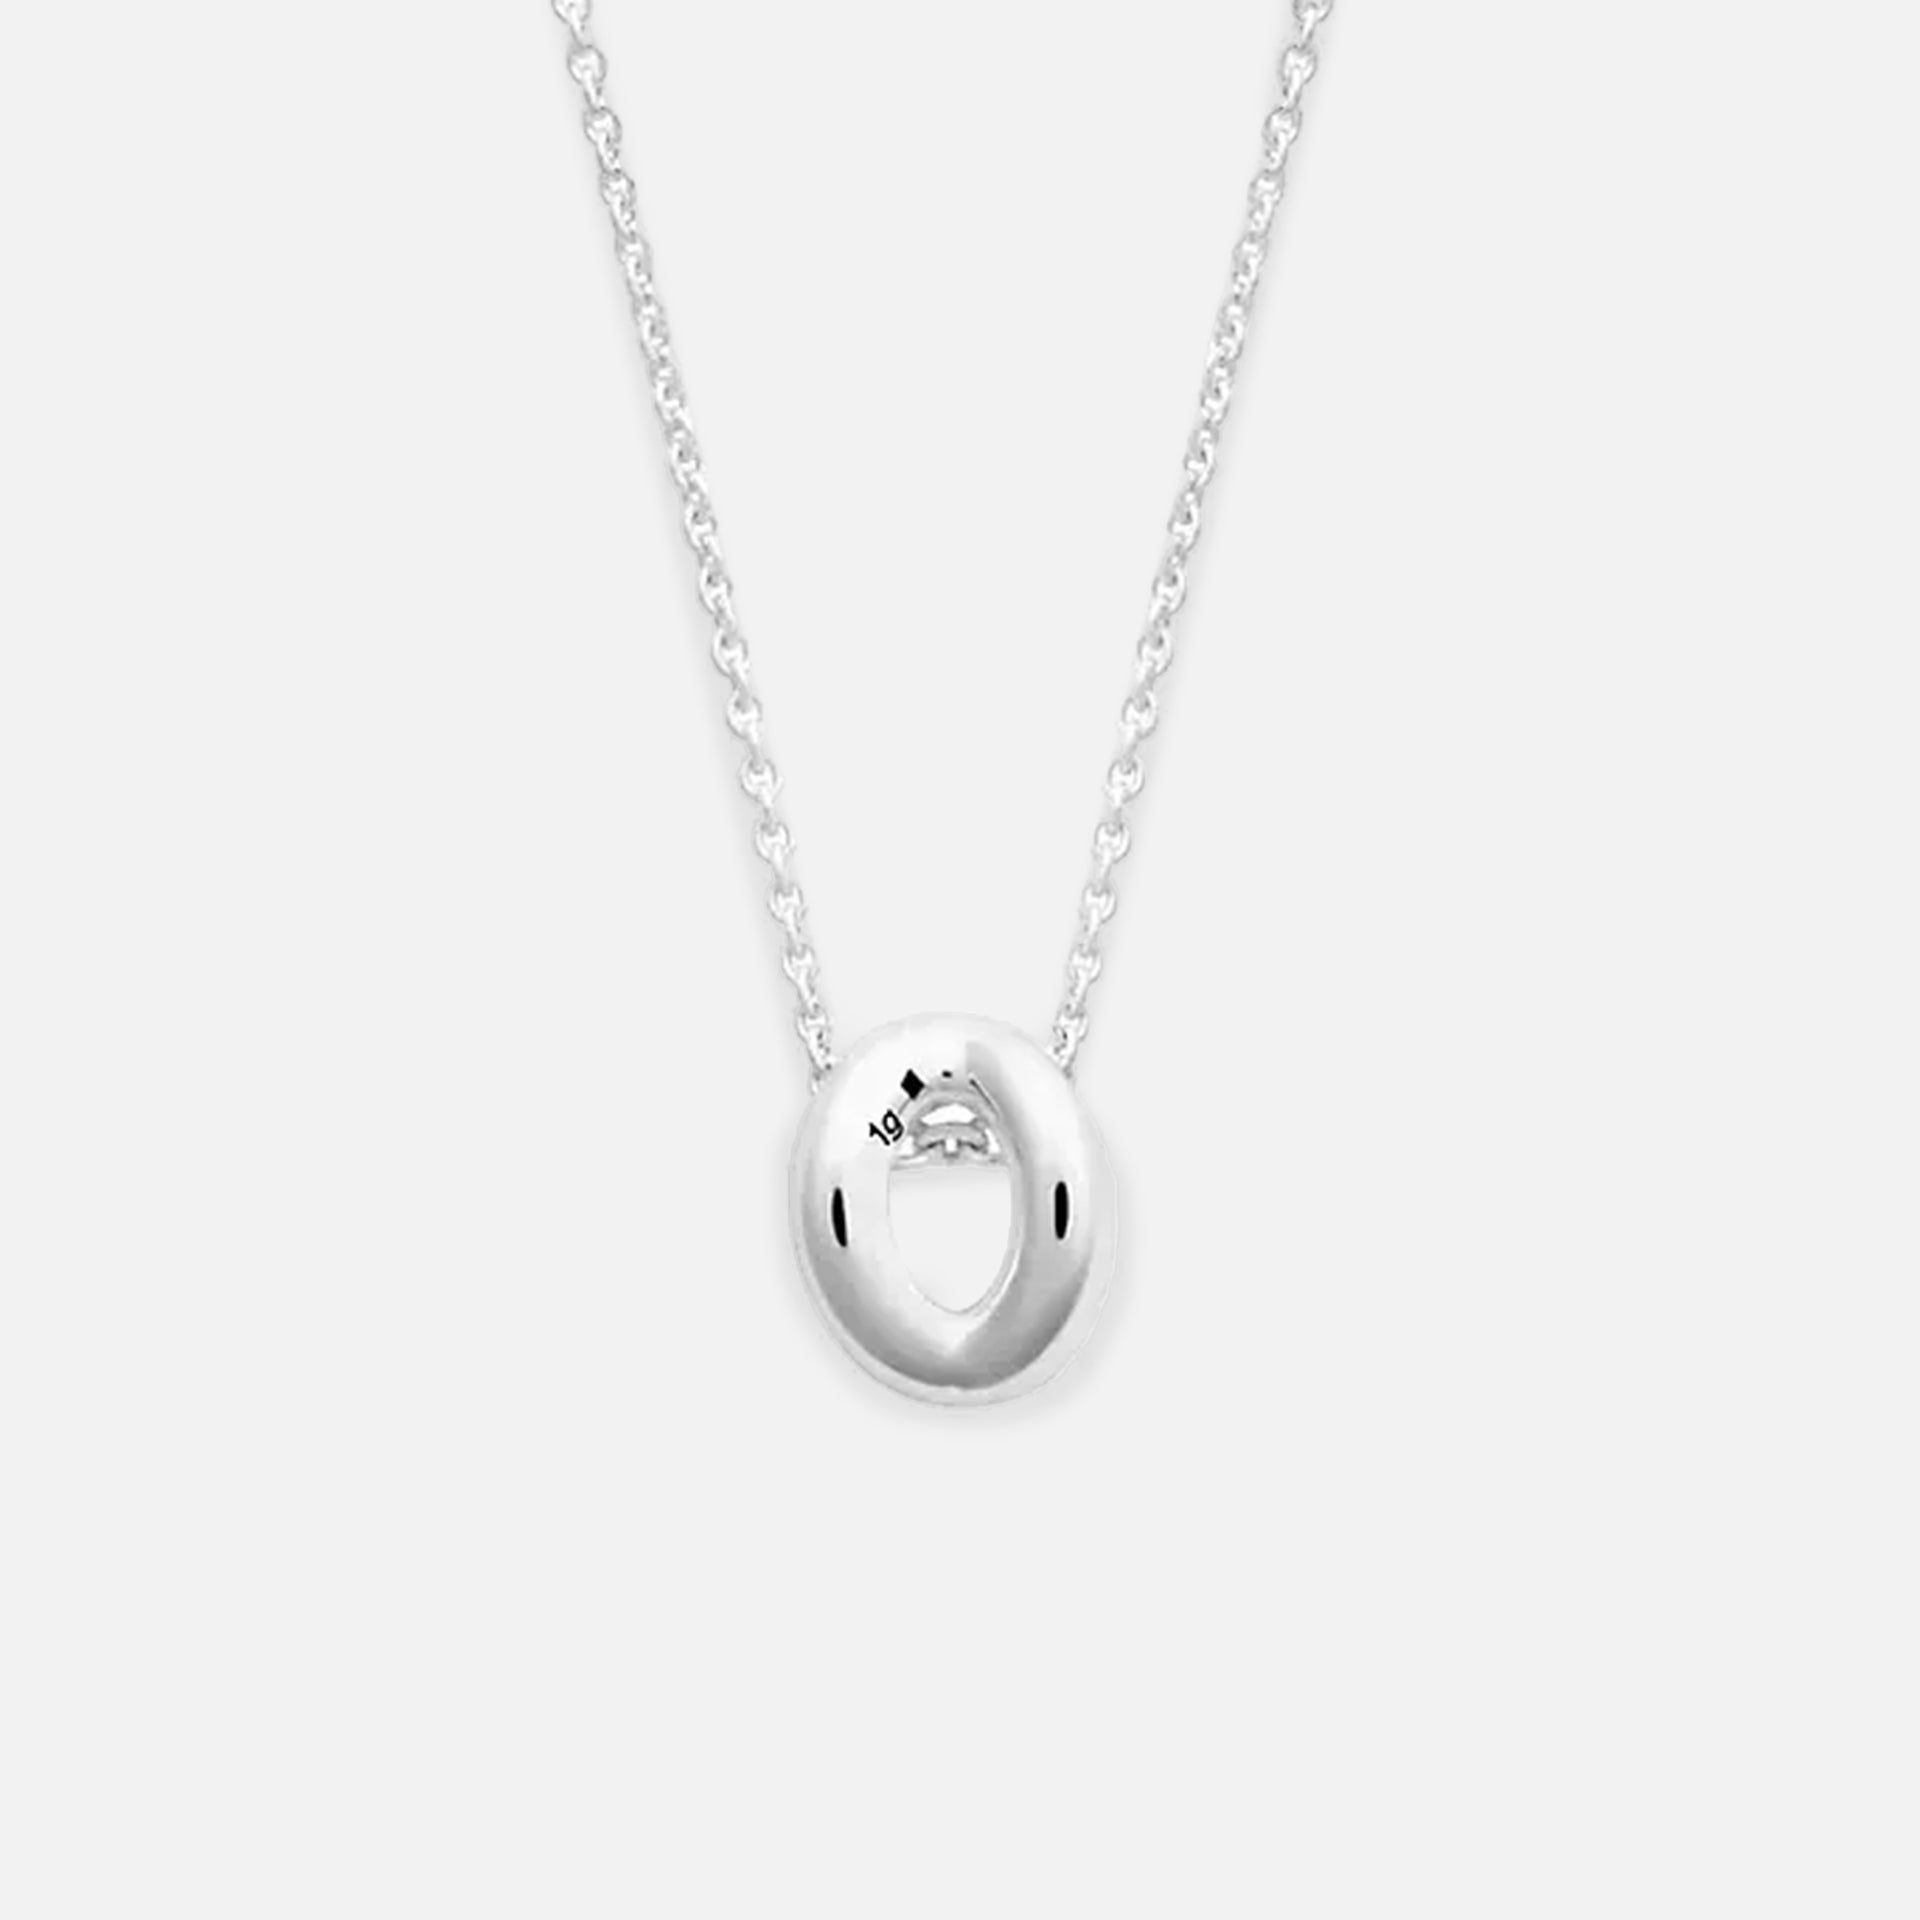 Le Gramme 1g Polished Sterling Silver Entrelacs Pendant with Chain - Silver